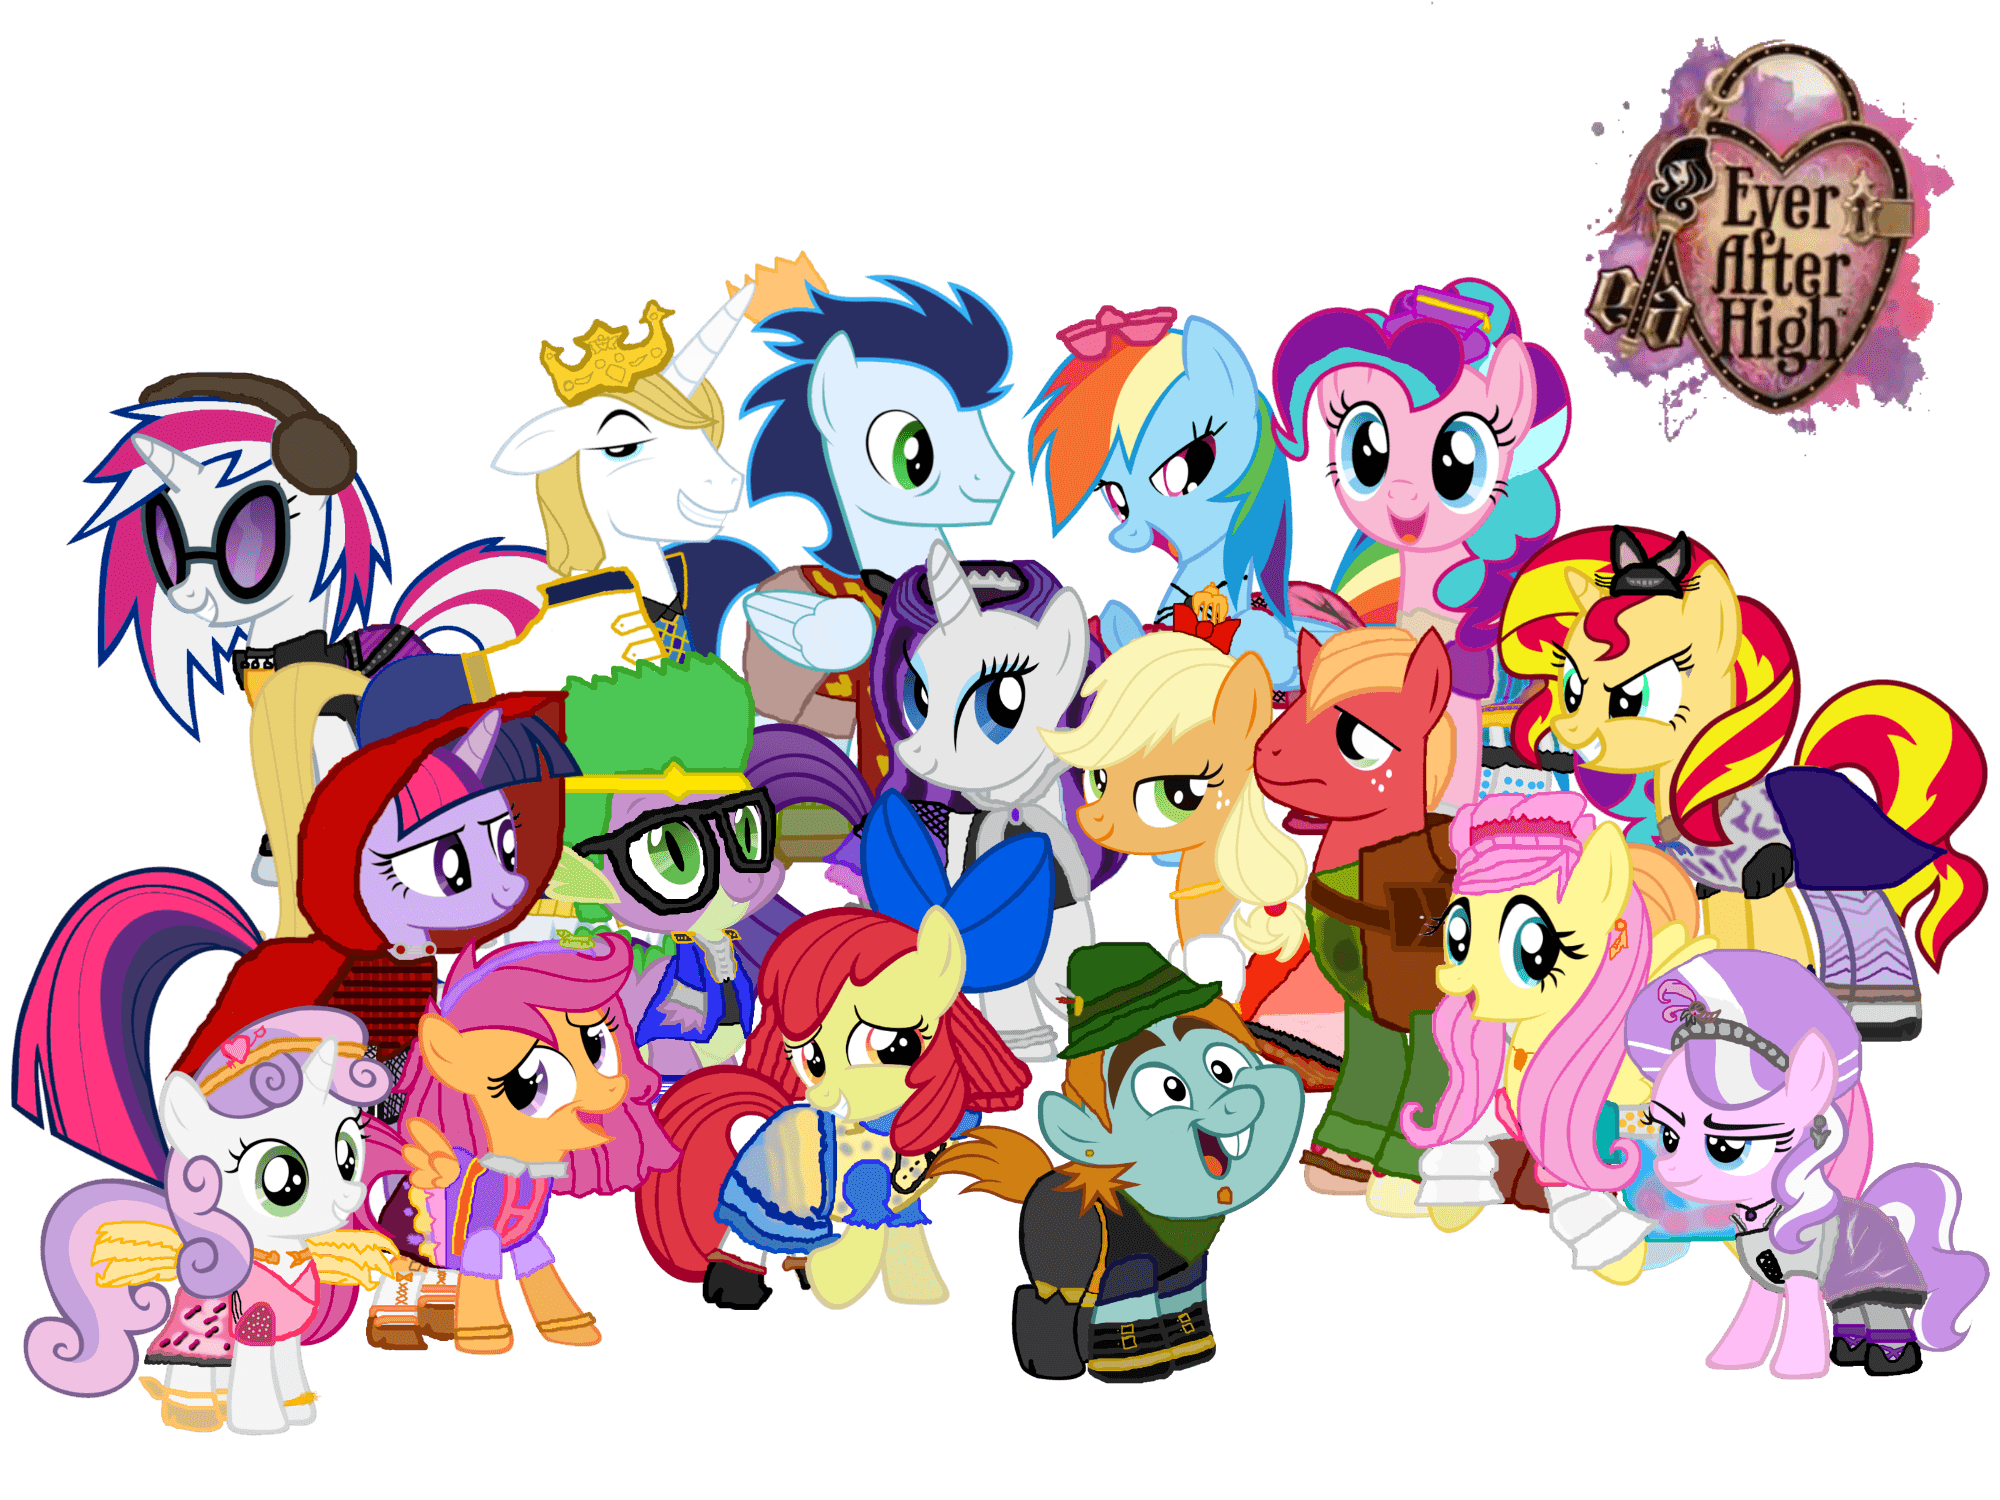 Best image about Ever After High. My little pony